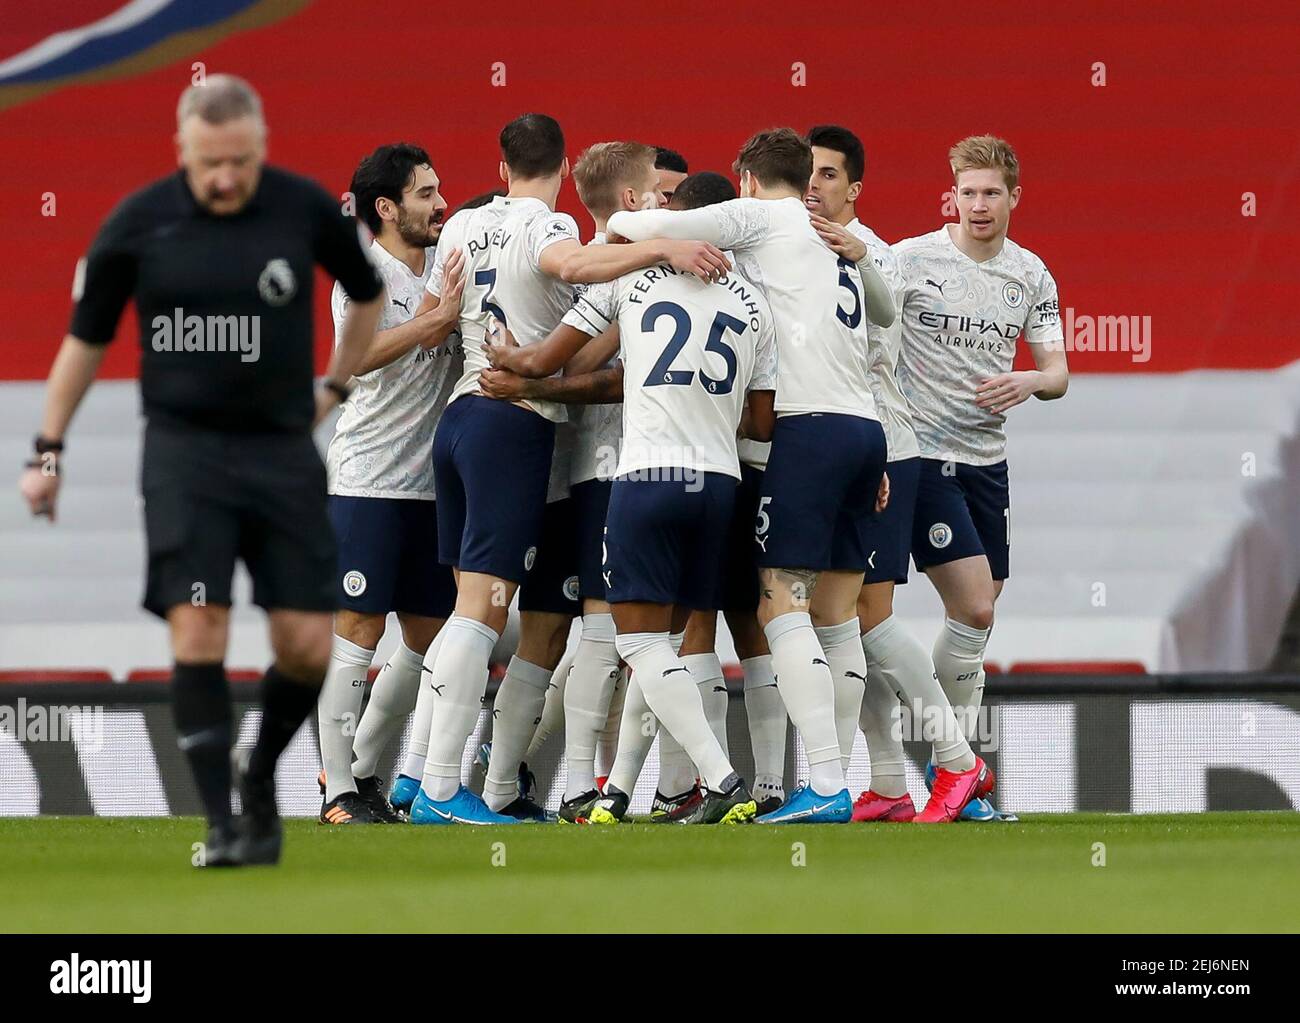 London, Britain. 21st Feb, 2021. Manchester City's players celebrate during the English Premier League football match between Arsenal and Manchester City at the Emirates Stadium in London, Britain, on Feb. 21, 2021. Credit: Han Yan/Xinhua/Alamy Live News Stock Photo